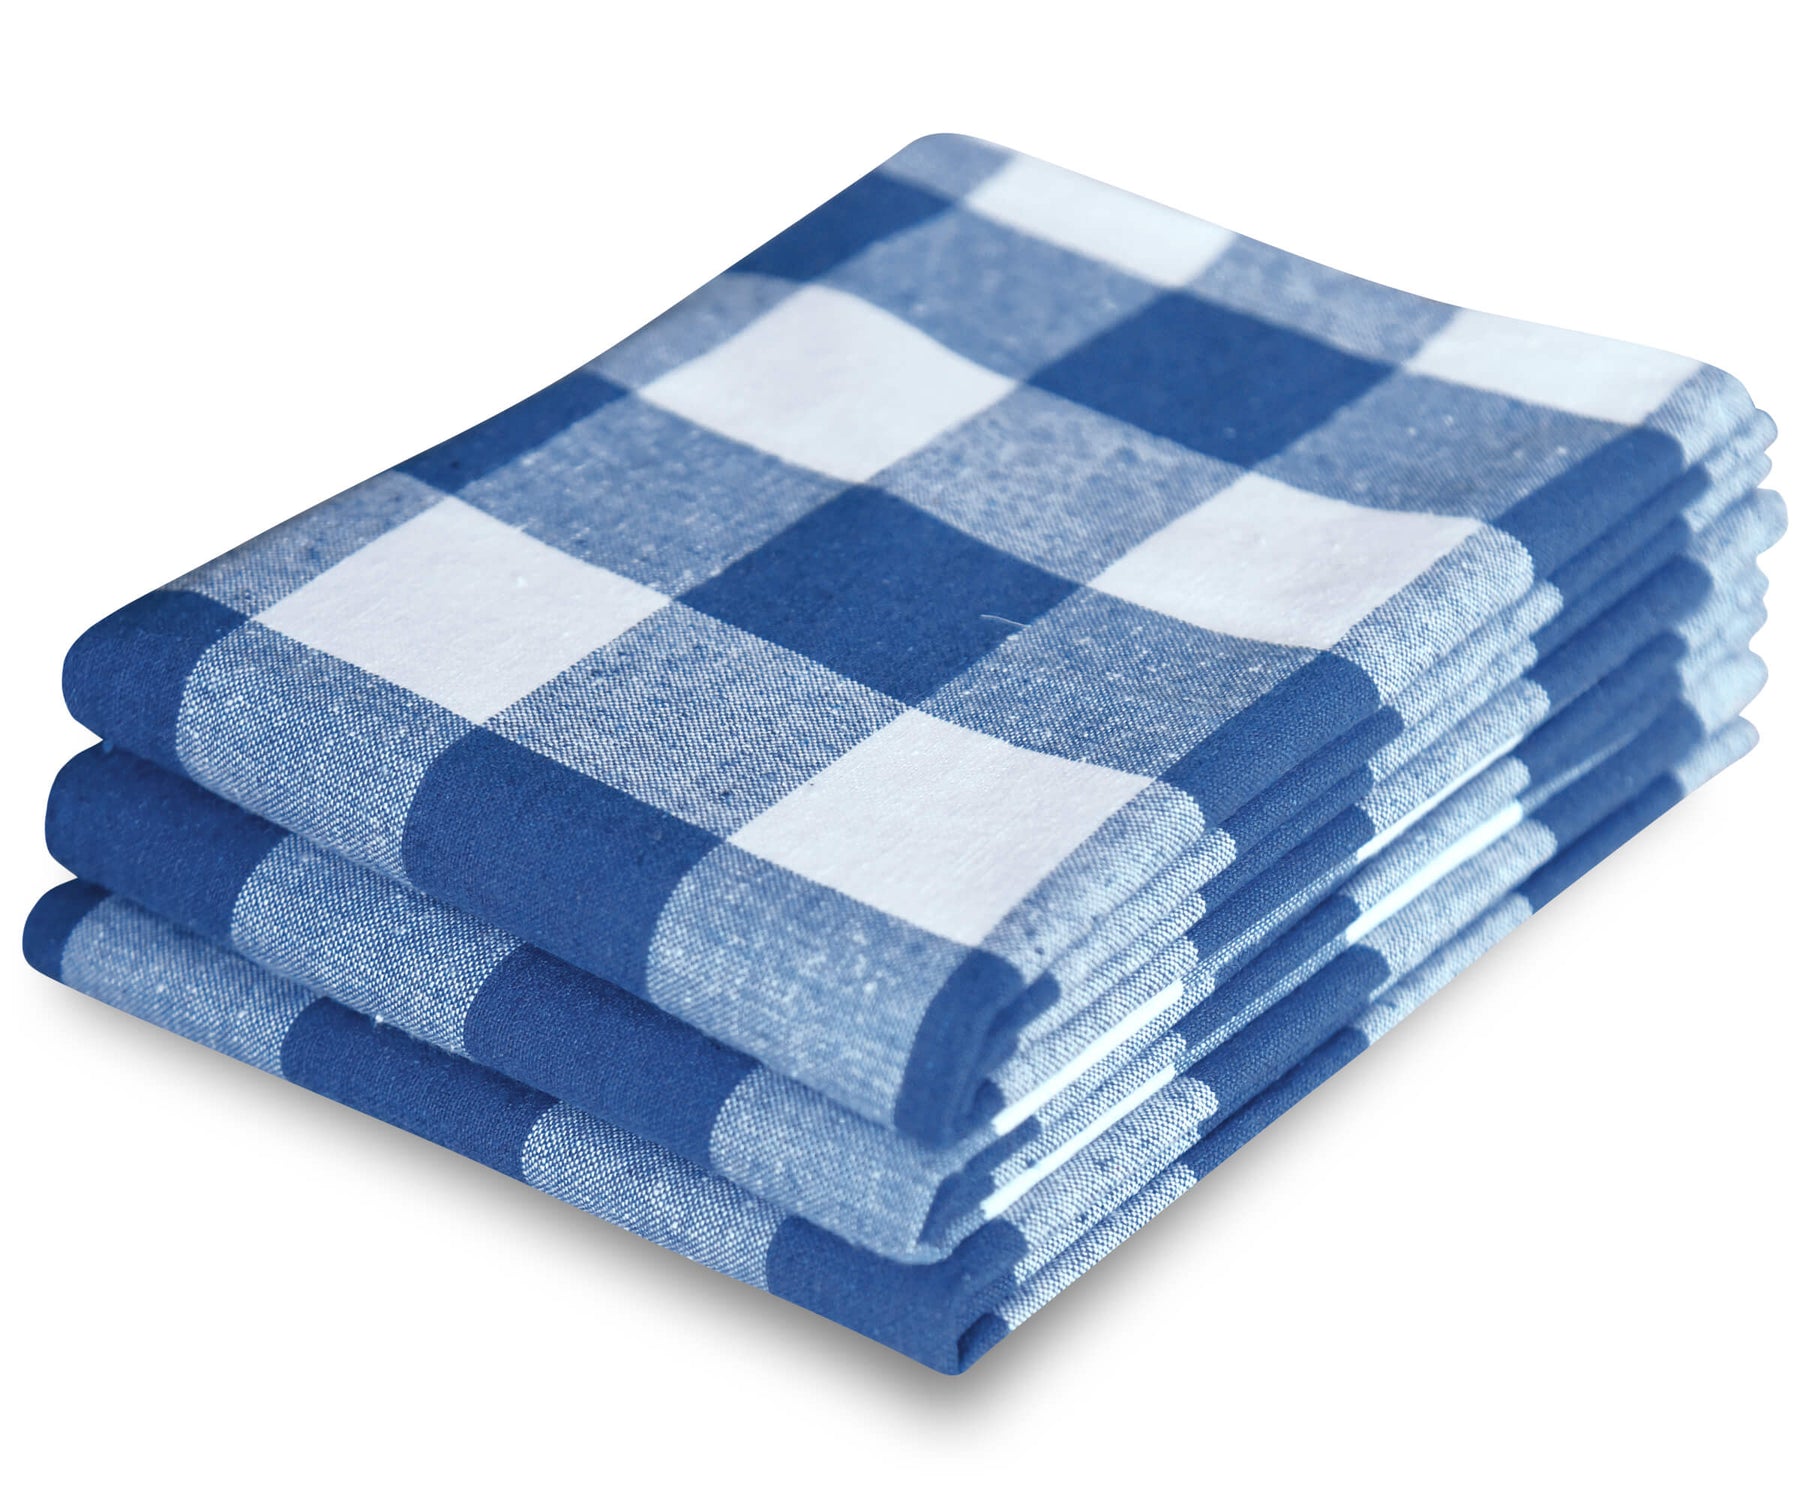 Blue and white dish towels are stylish and practical, adding a touch of color to your kitchen while also being functional.